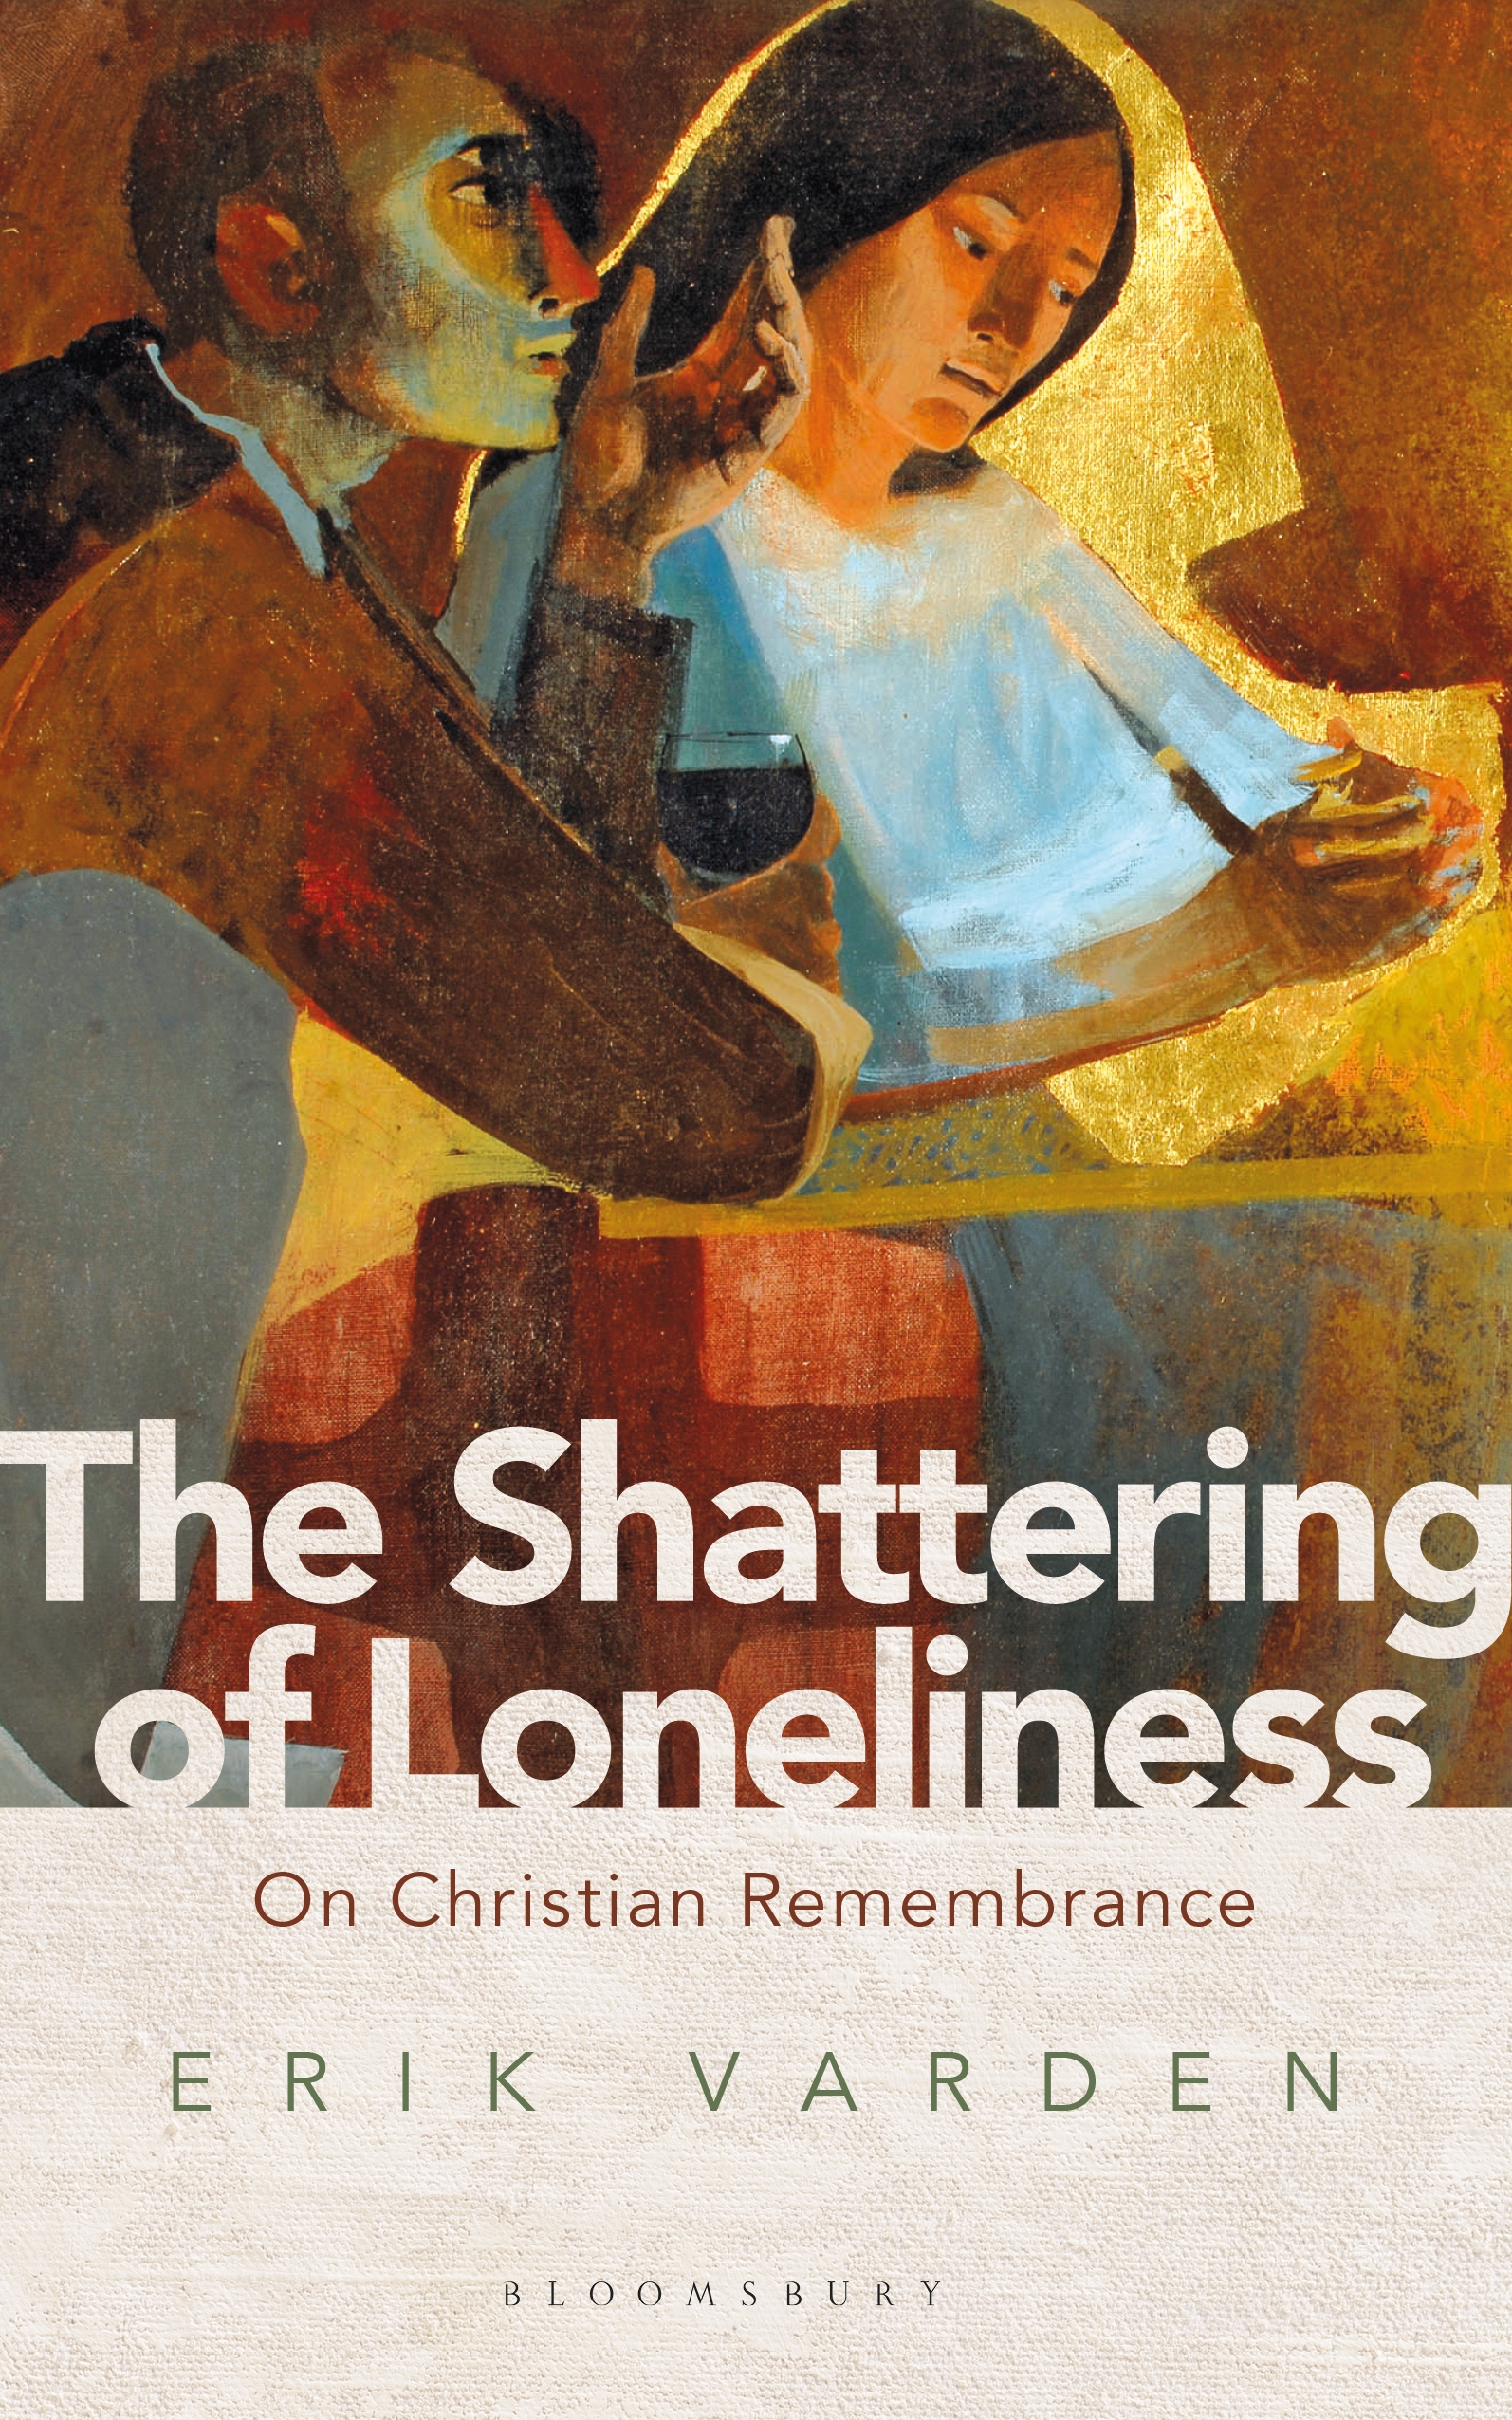 The Shattering of Loneliness - 10-14.99